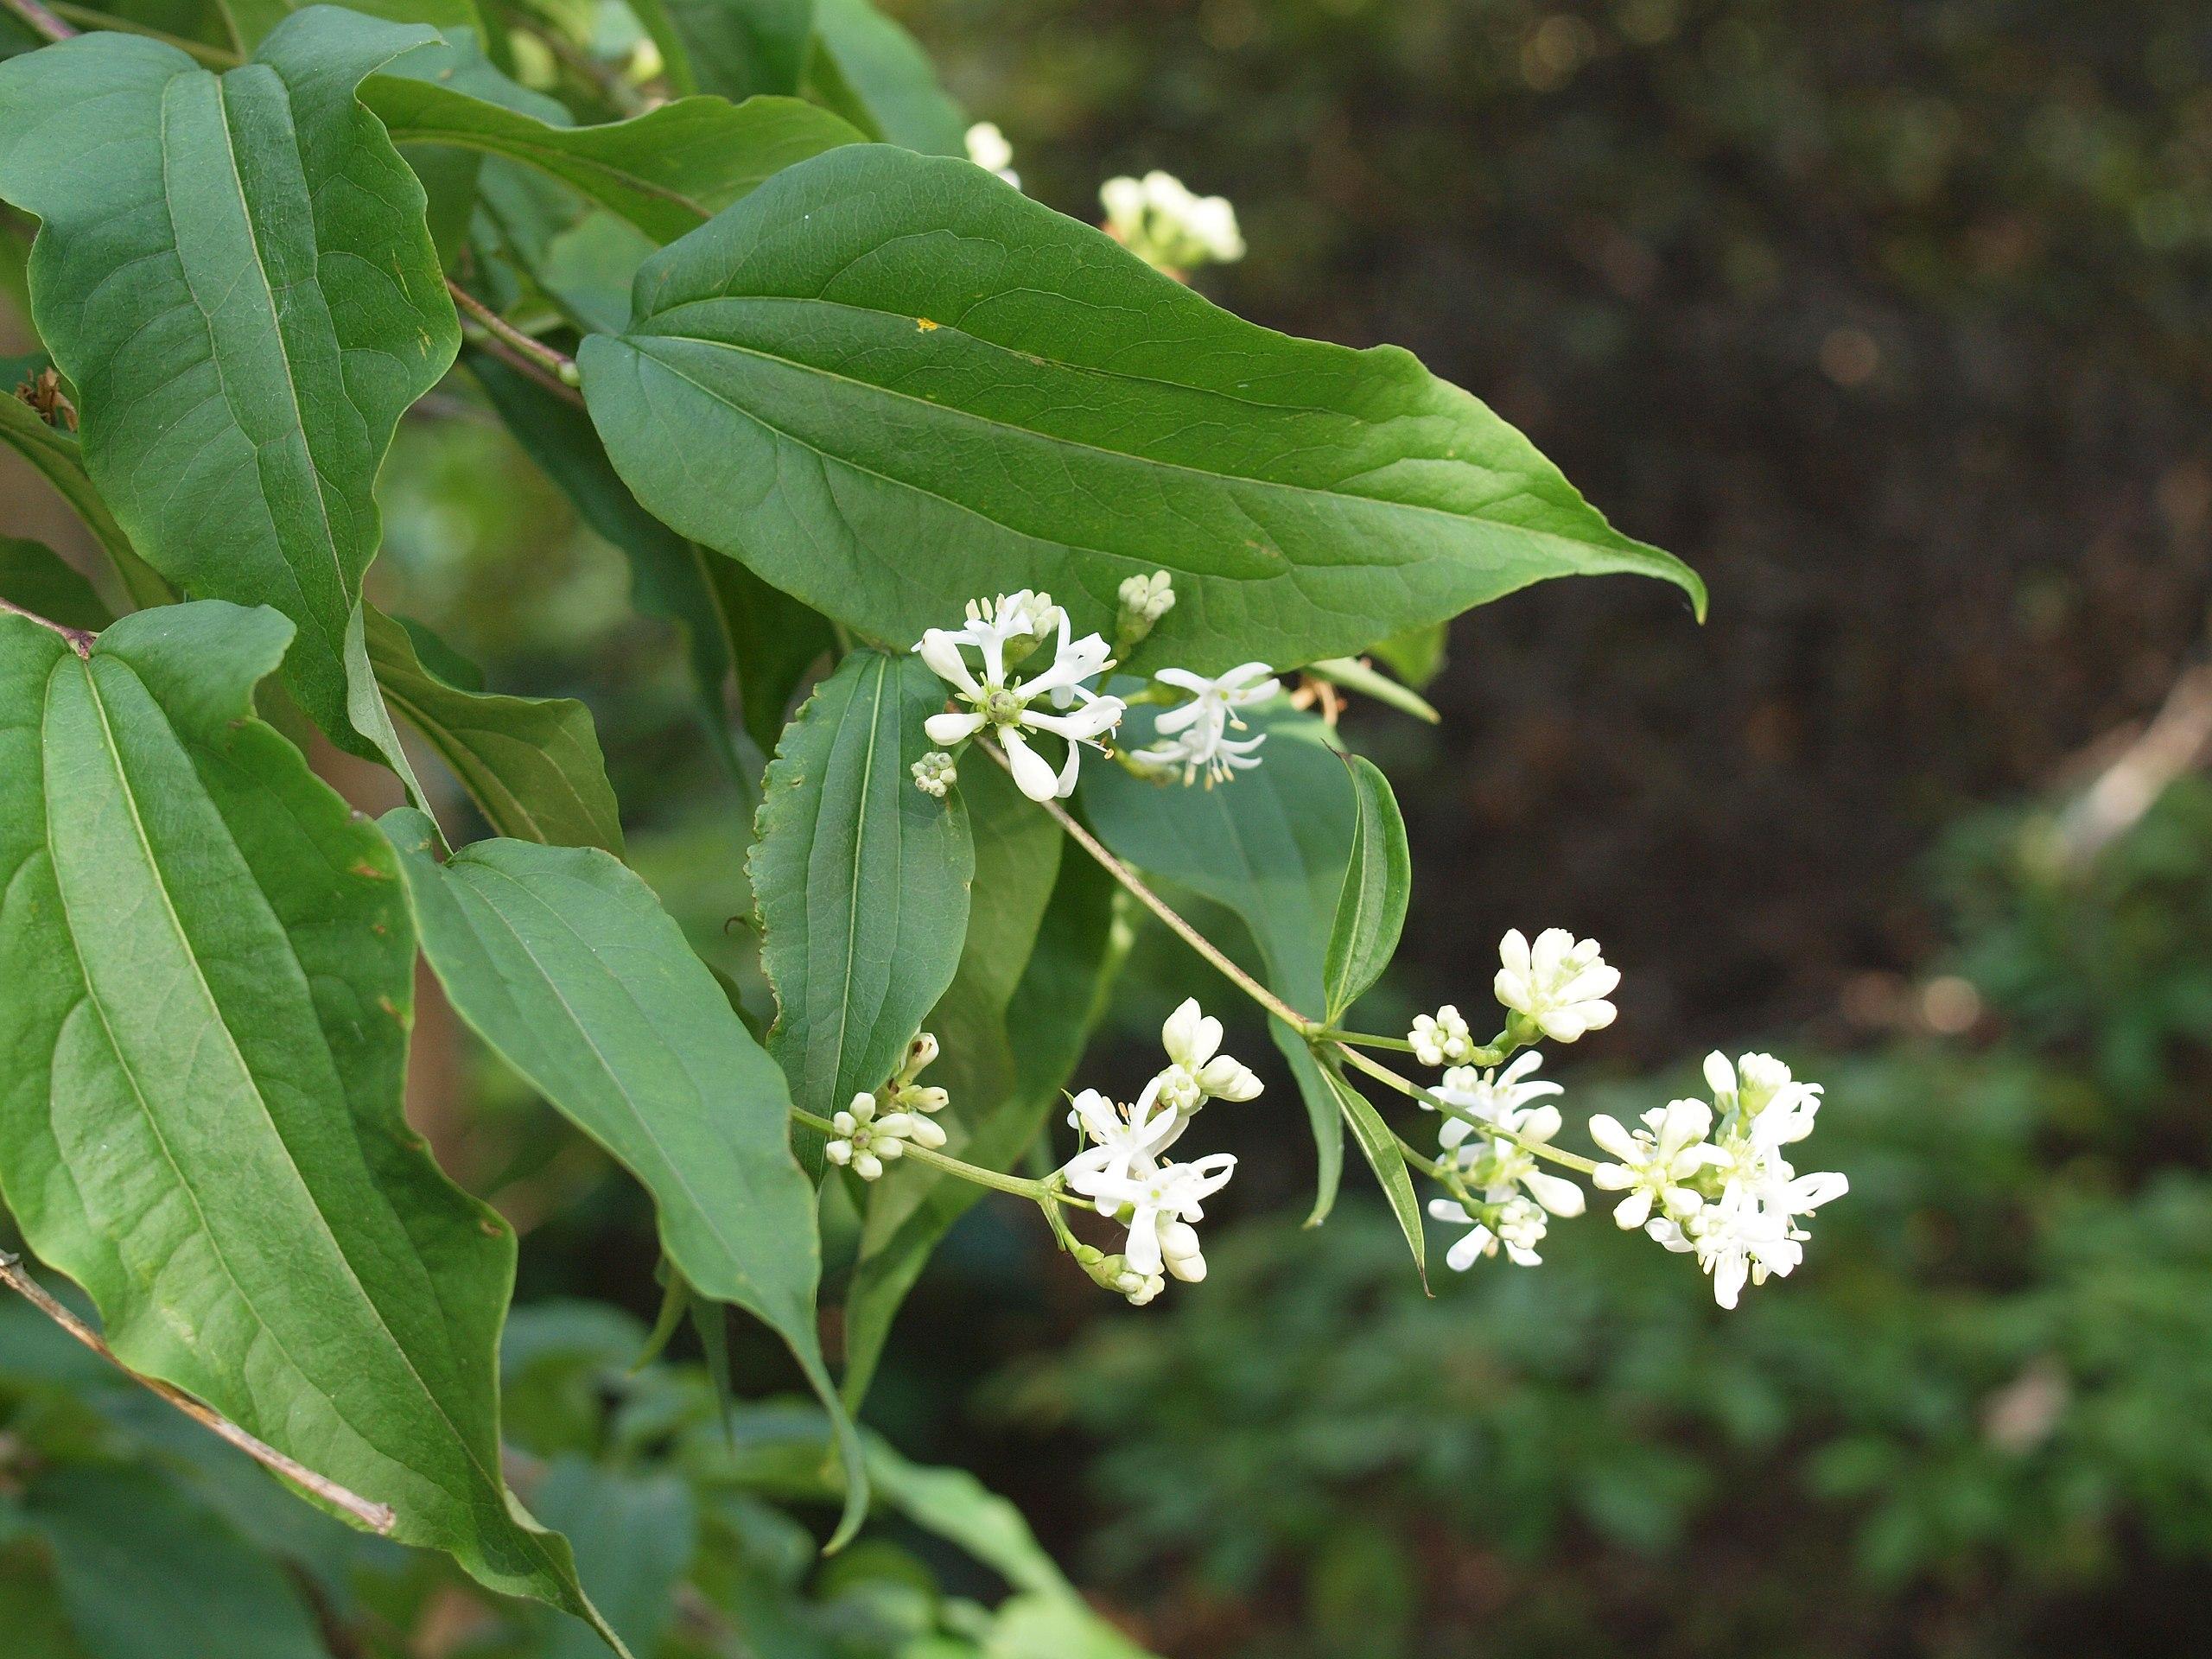 White flowers with lime center, yellow stem, green leaves, yellow midrib and veins